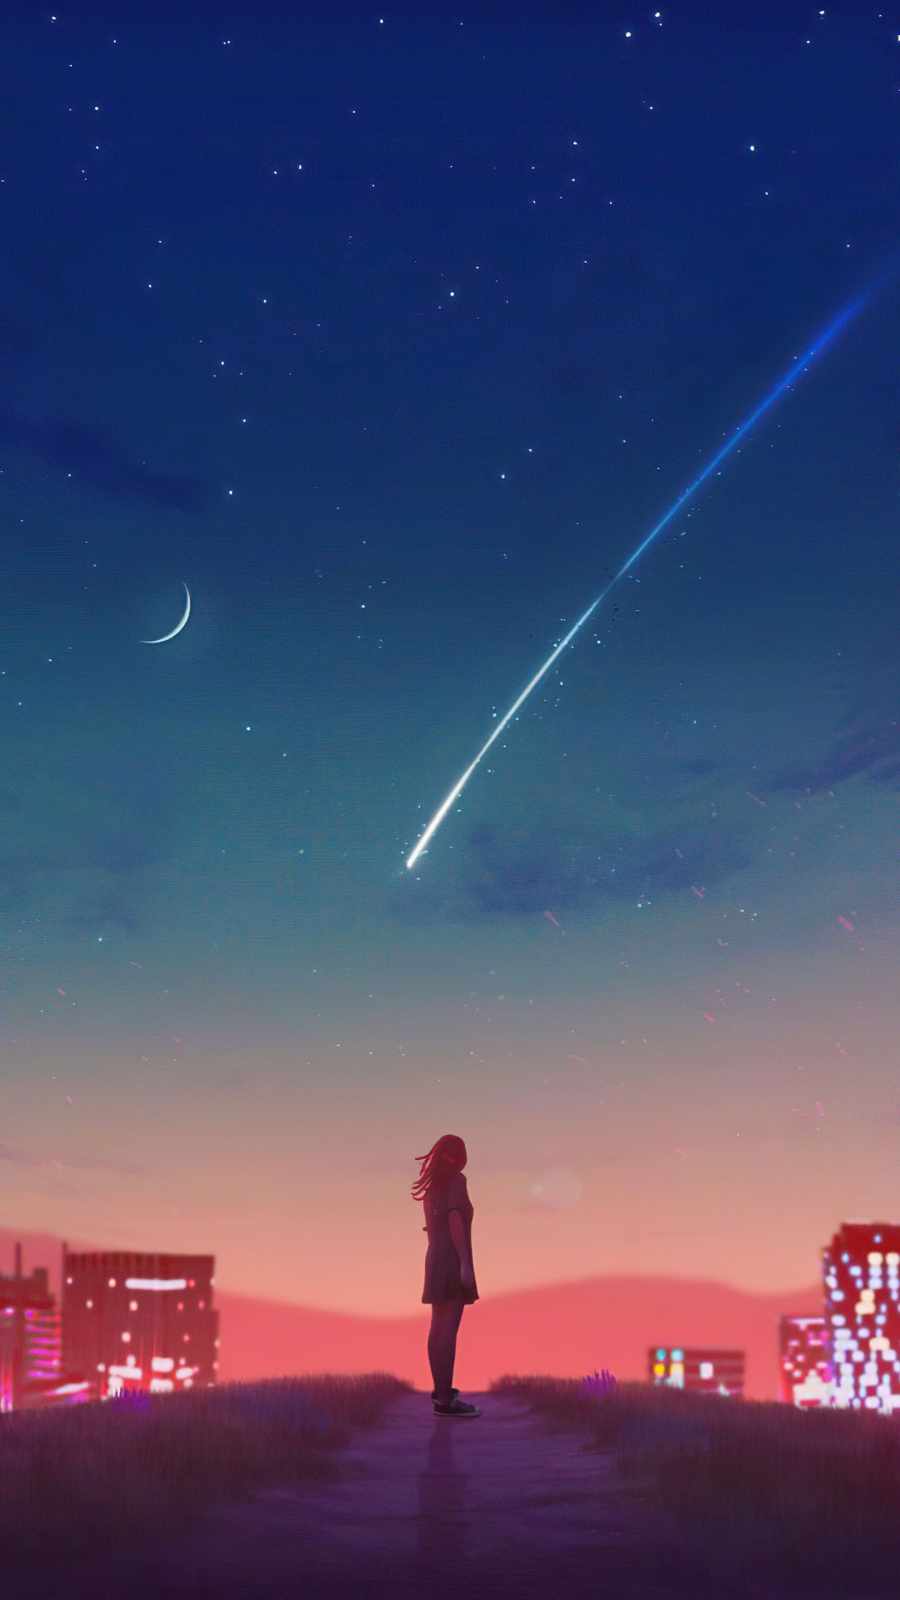 Alone Girl and Shooting Star iPhone Wallpaper